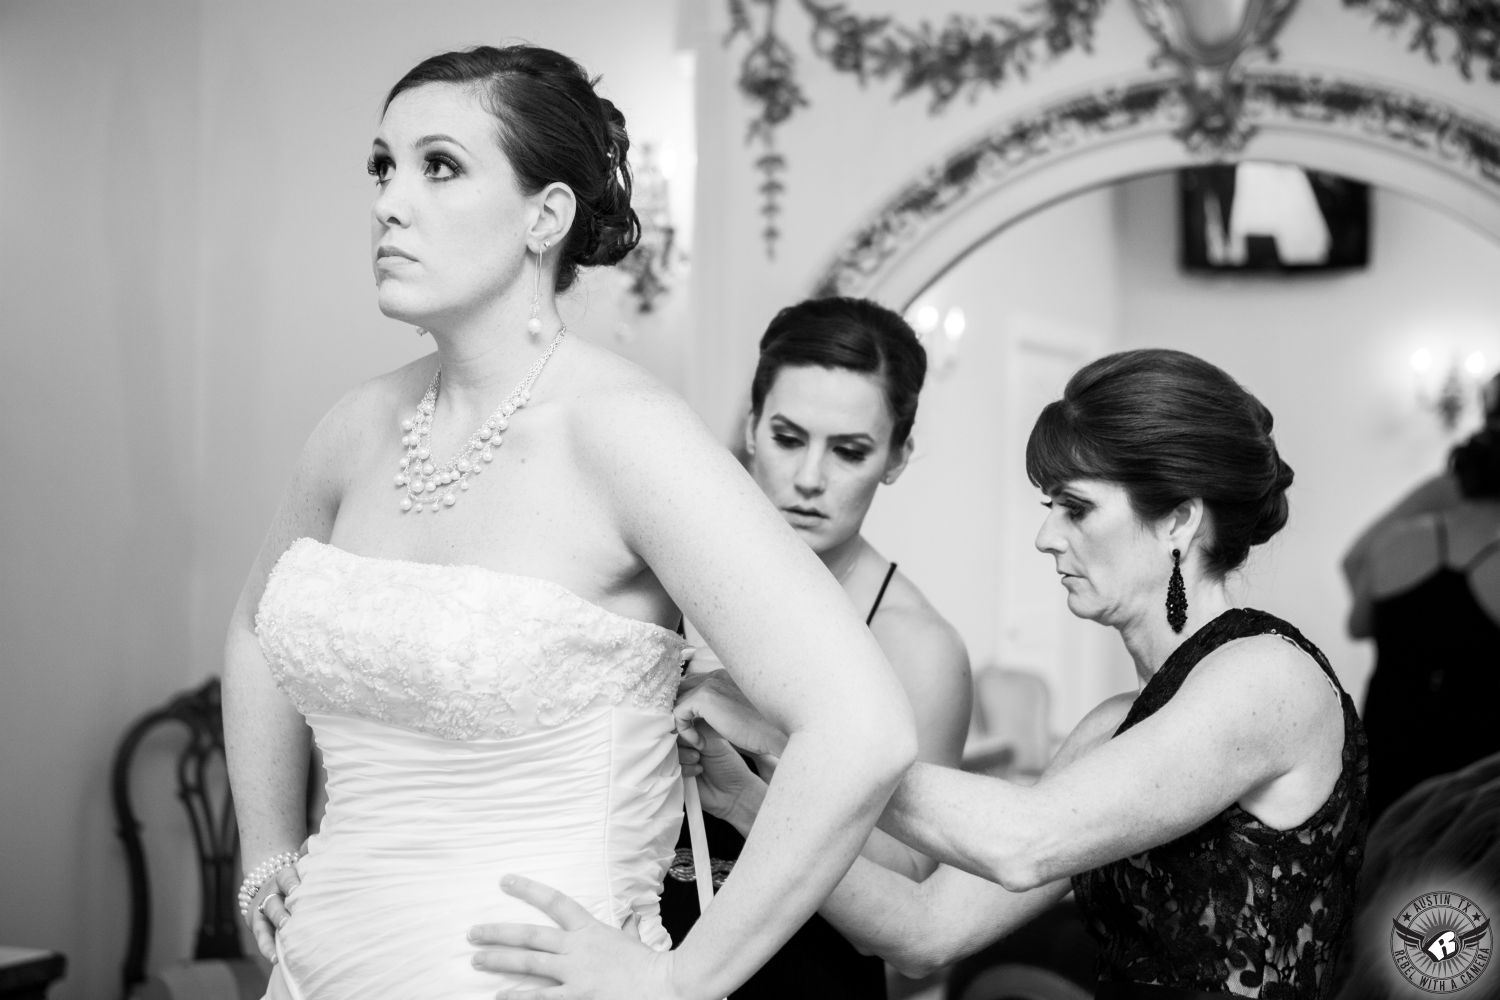 Dramatic black and white images of bridesmaids in black dresses lacing up corset of bride's wedding dress in front of large decorated mirror in bridal room at Villa St. Clair Austin wedding venue taken by Austin wedding photographer.